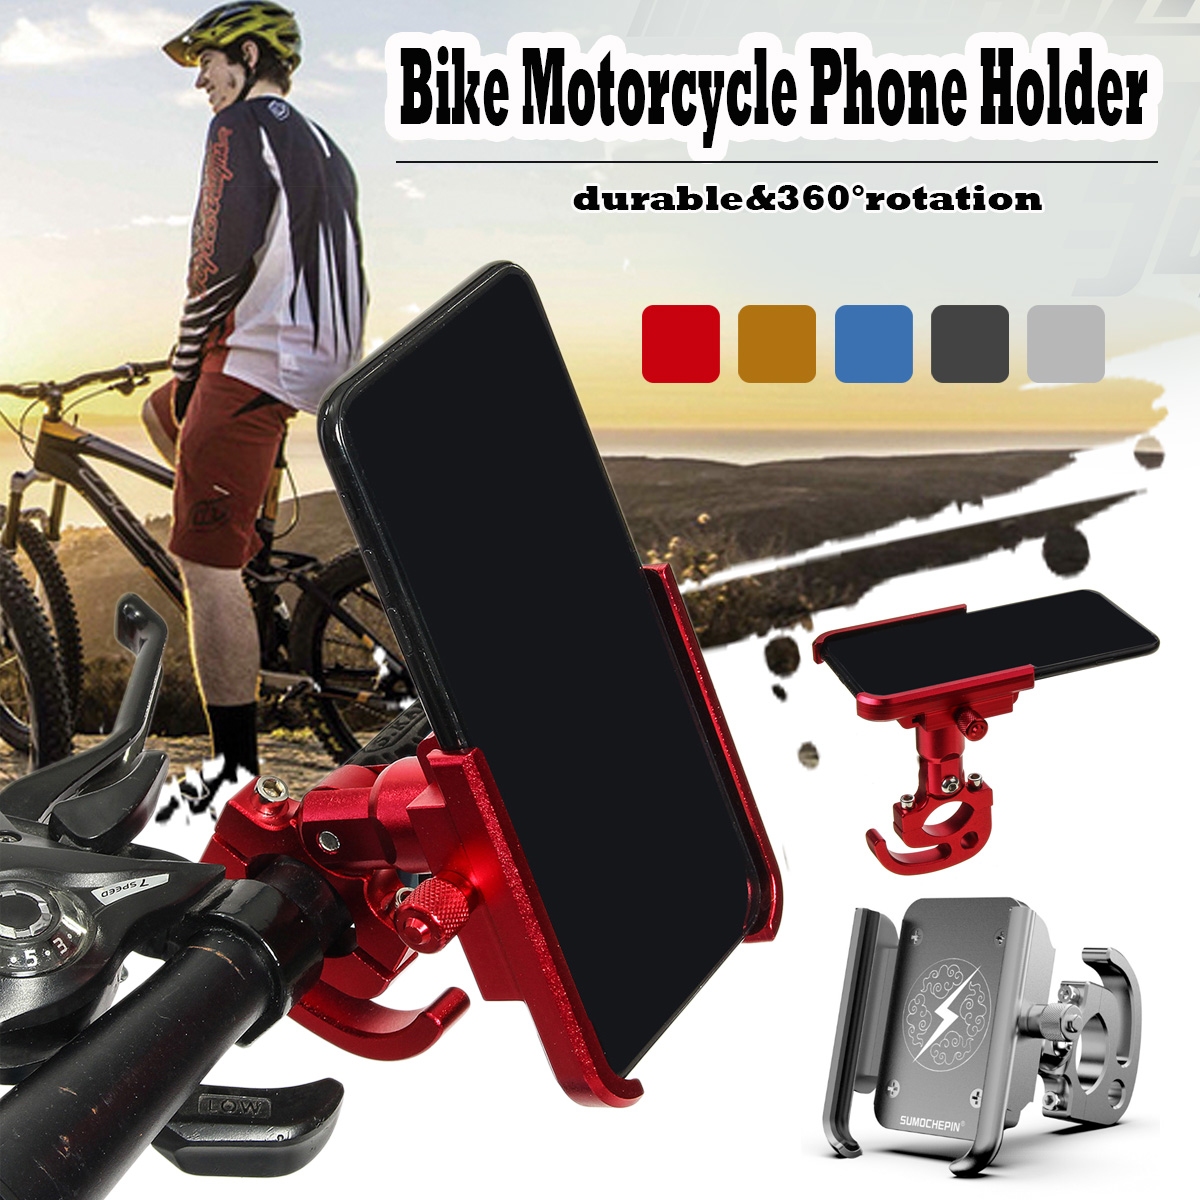 Aluminum-Alloy-Bike-Motorcycle-Phone-Holder-360-Degree-Rotation-For-40-Inch---64-Inch-Smart-Phone-1476006-1